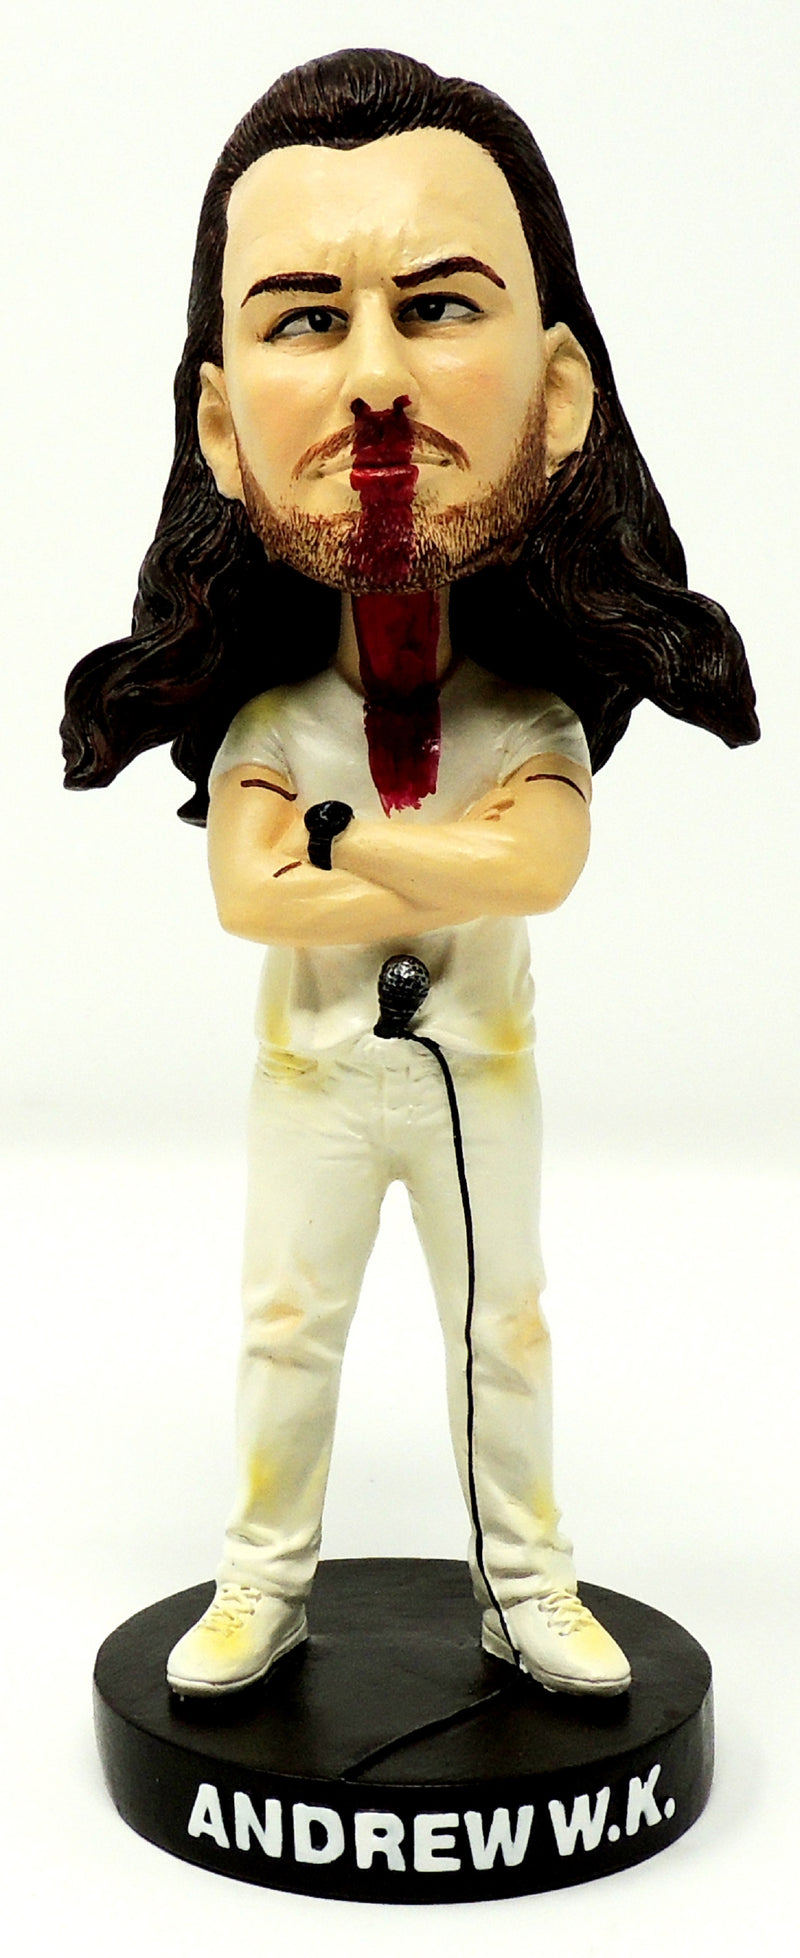 Andrew W.k. - Throbblehead V2 (numbered Limited Edition) (Merch)